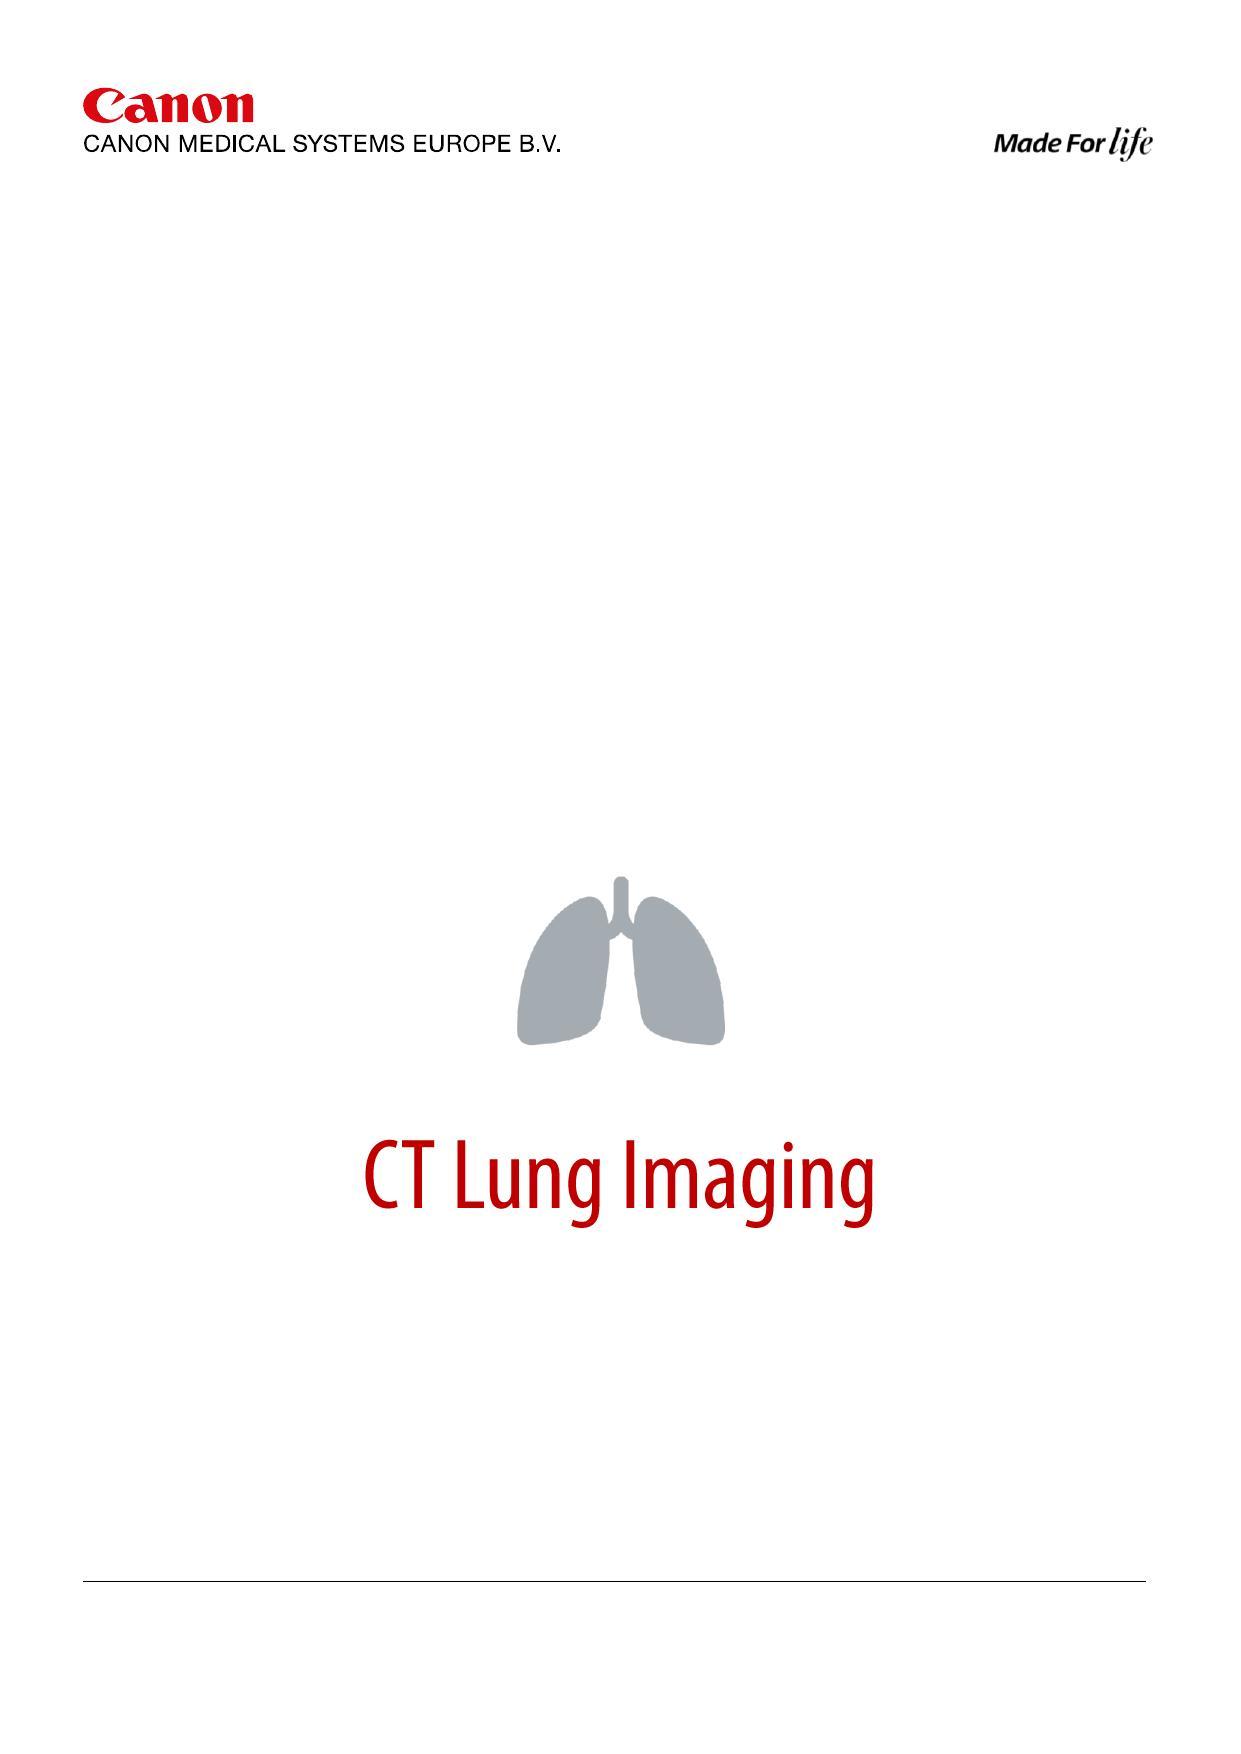 canon-medical-systems-europe-bv-ct-lung-imaging-user-manual.pdf